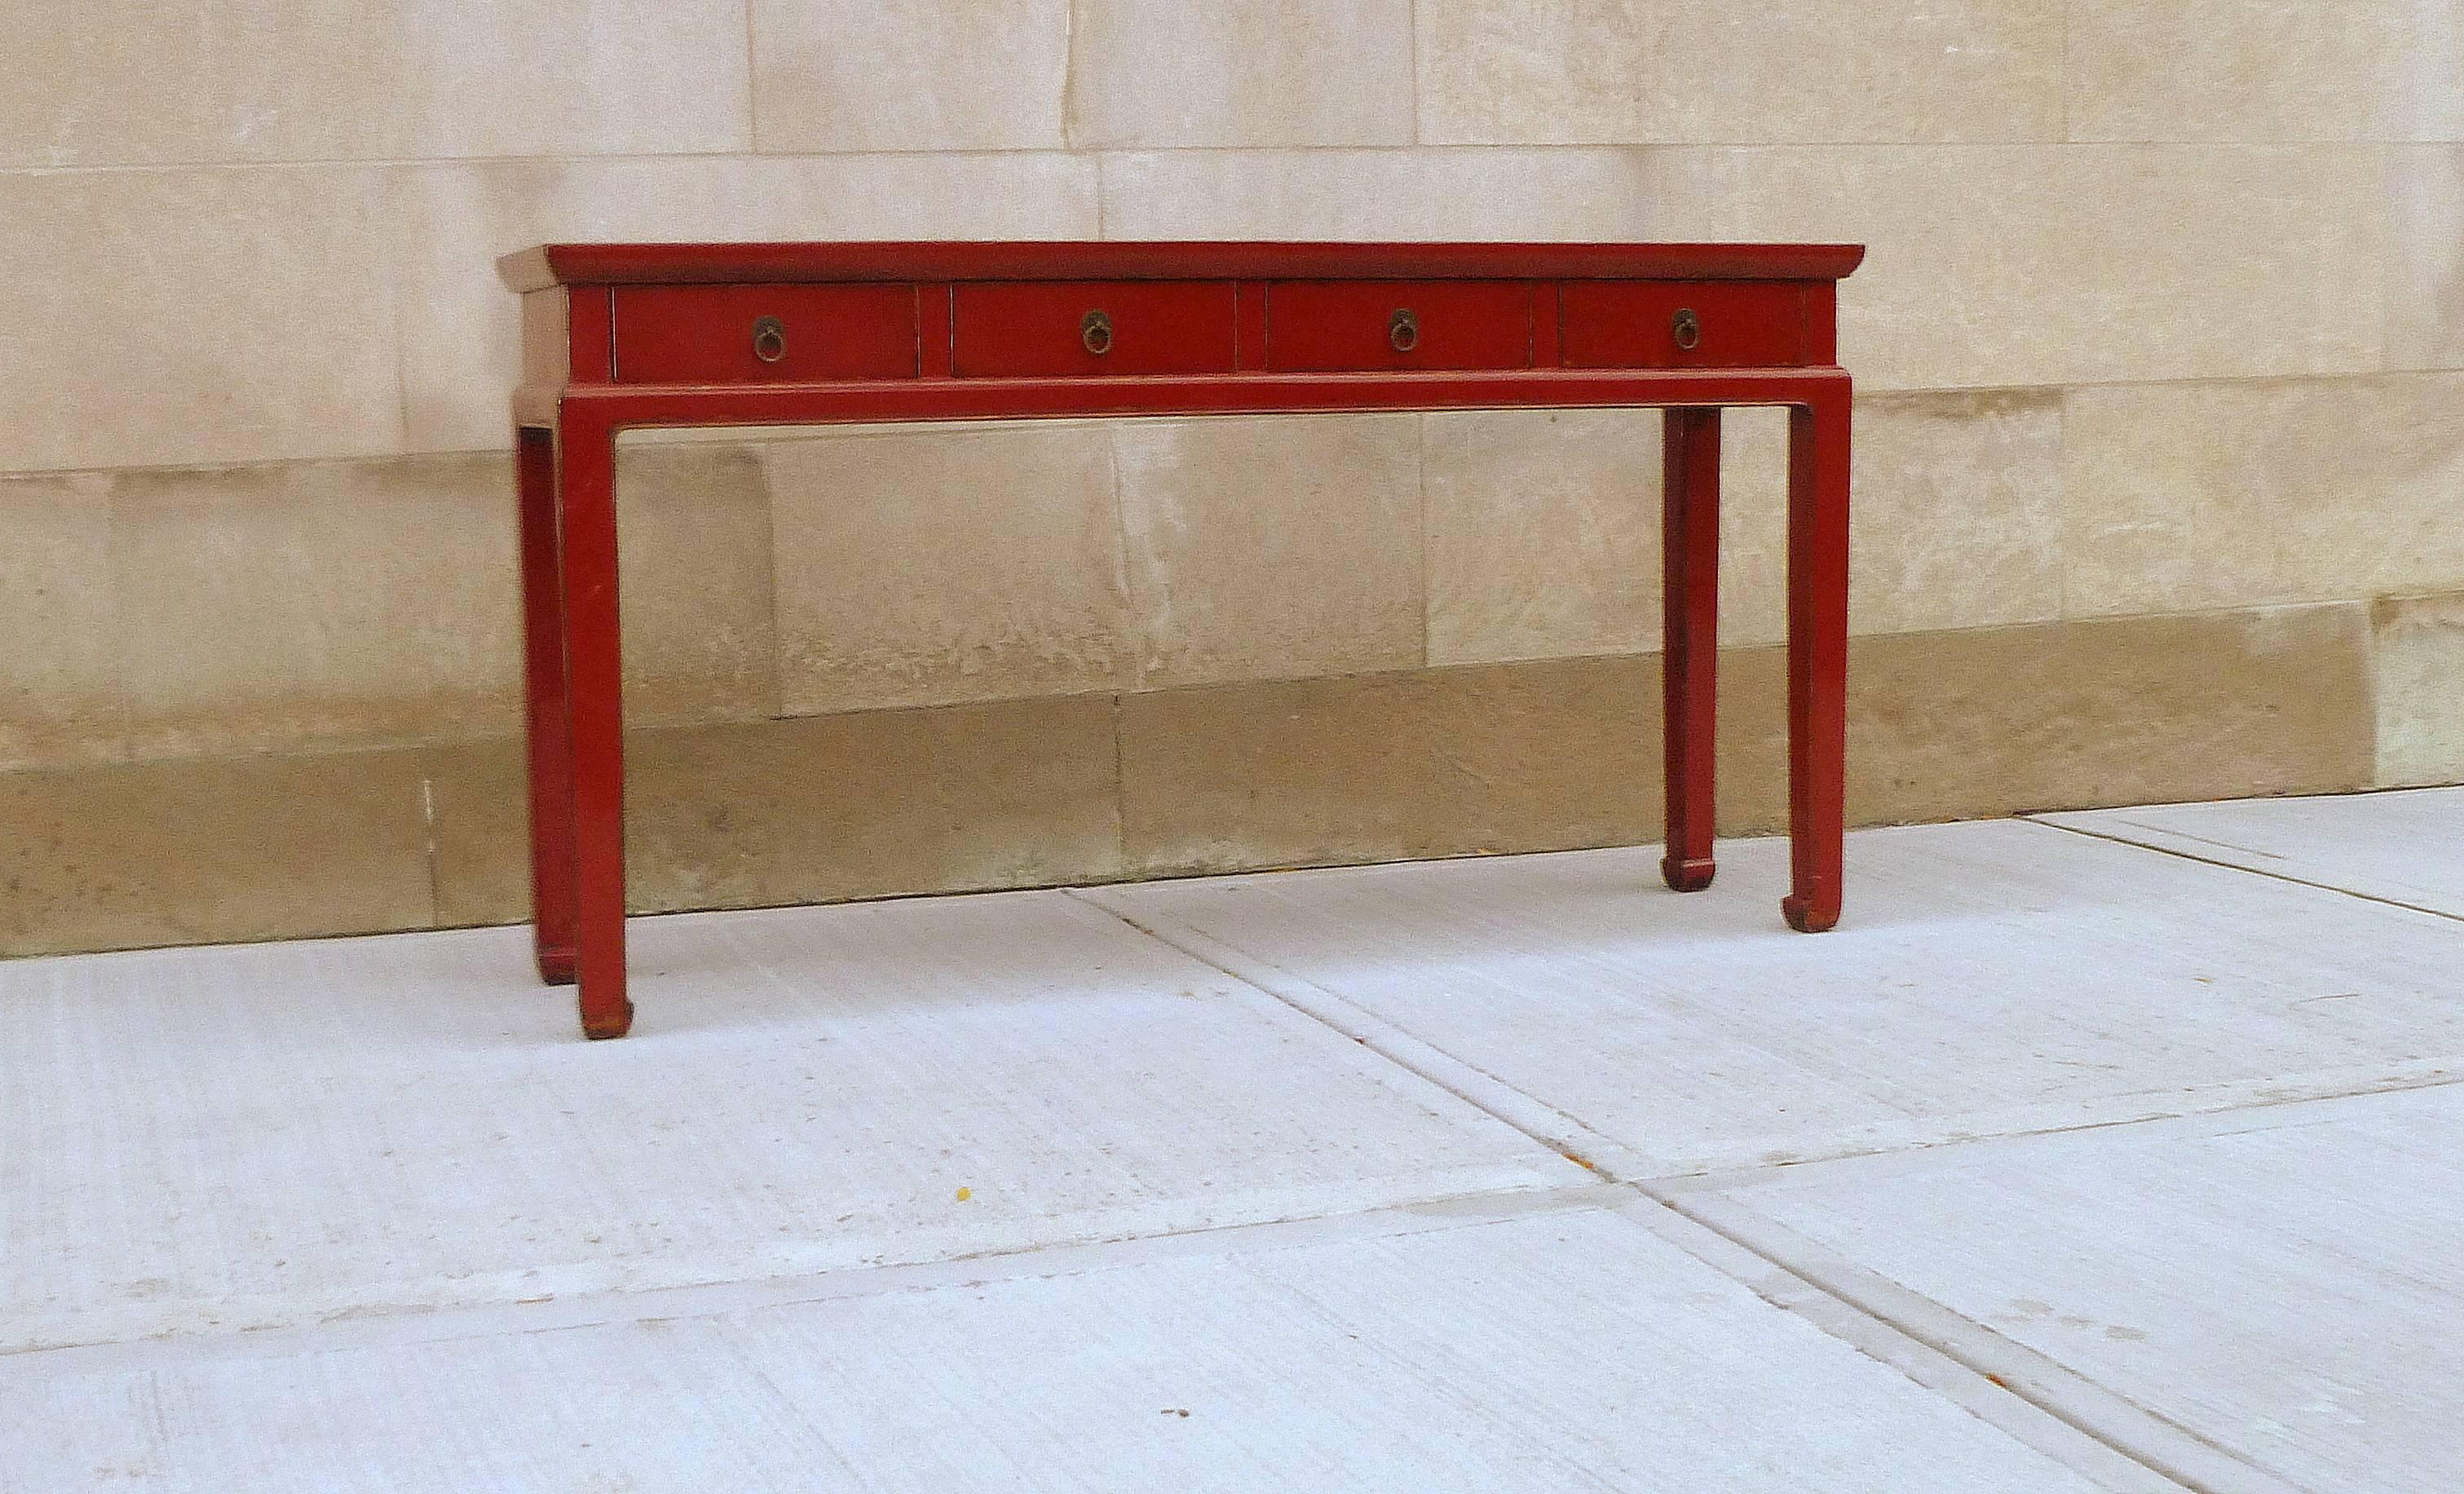 Polished Red Lacquer Console Table with Drawers